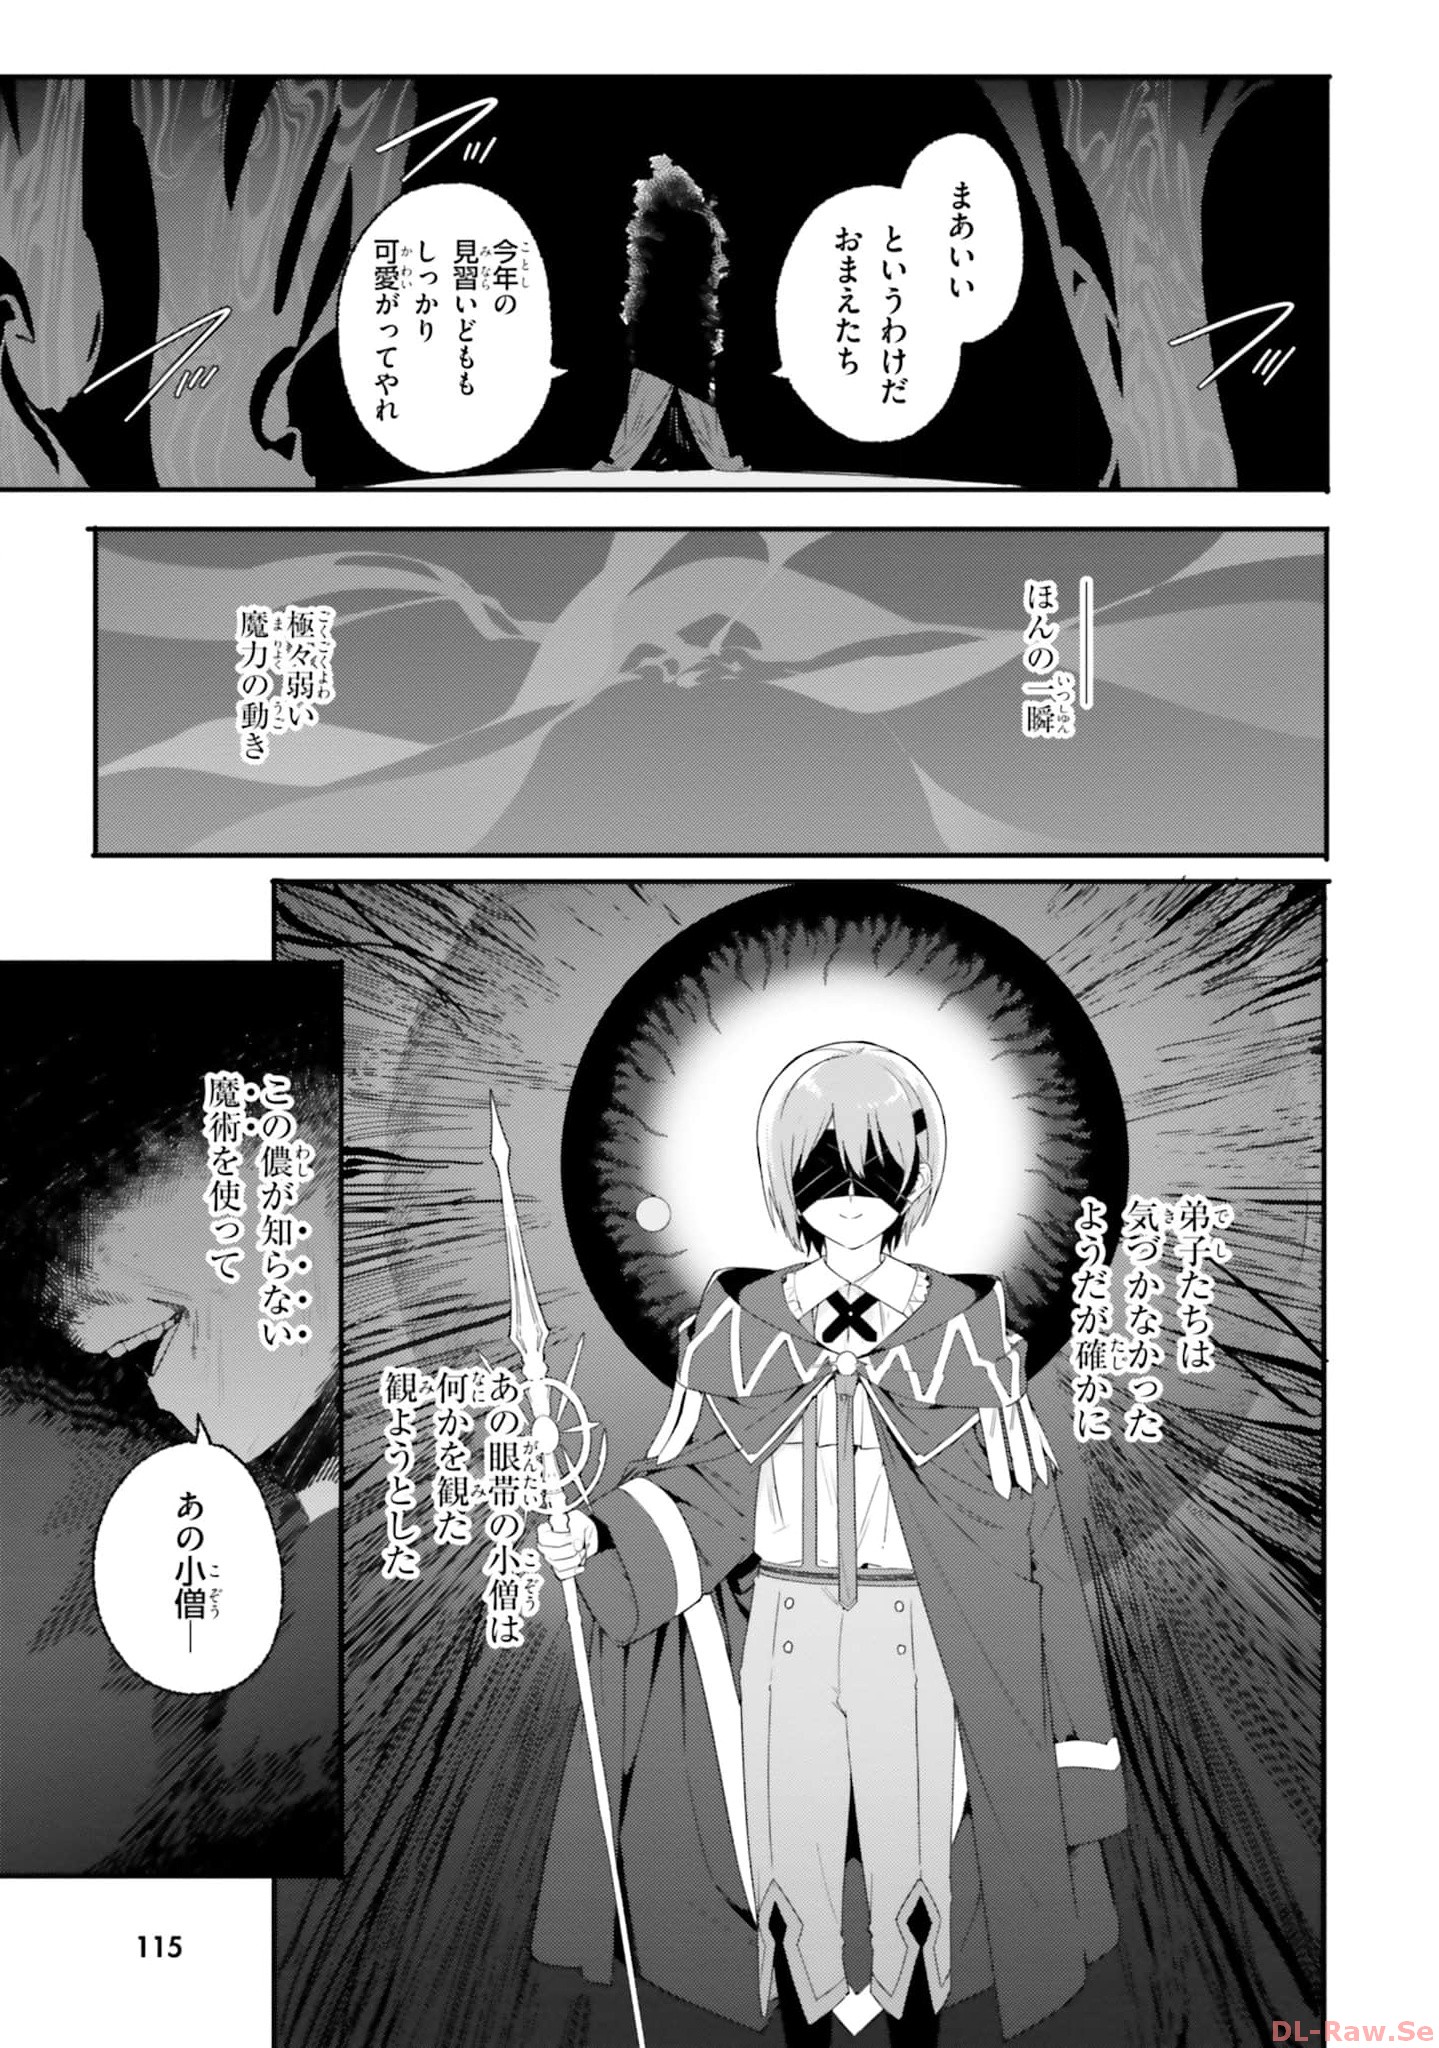 Kunon the Sorcerer Can See Kunon the Sorcerer Can See Through 魔術師クノンは見えている 第17話 - Page 23